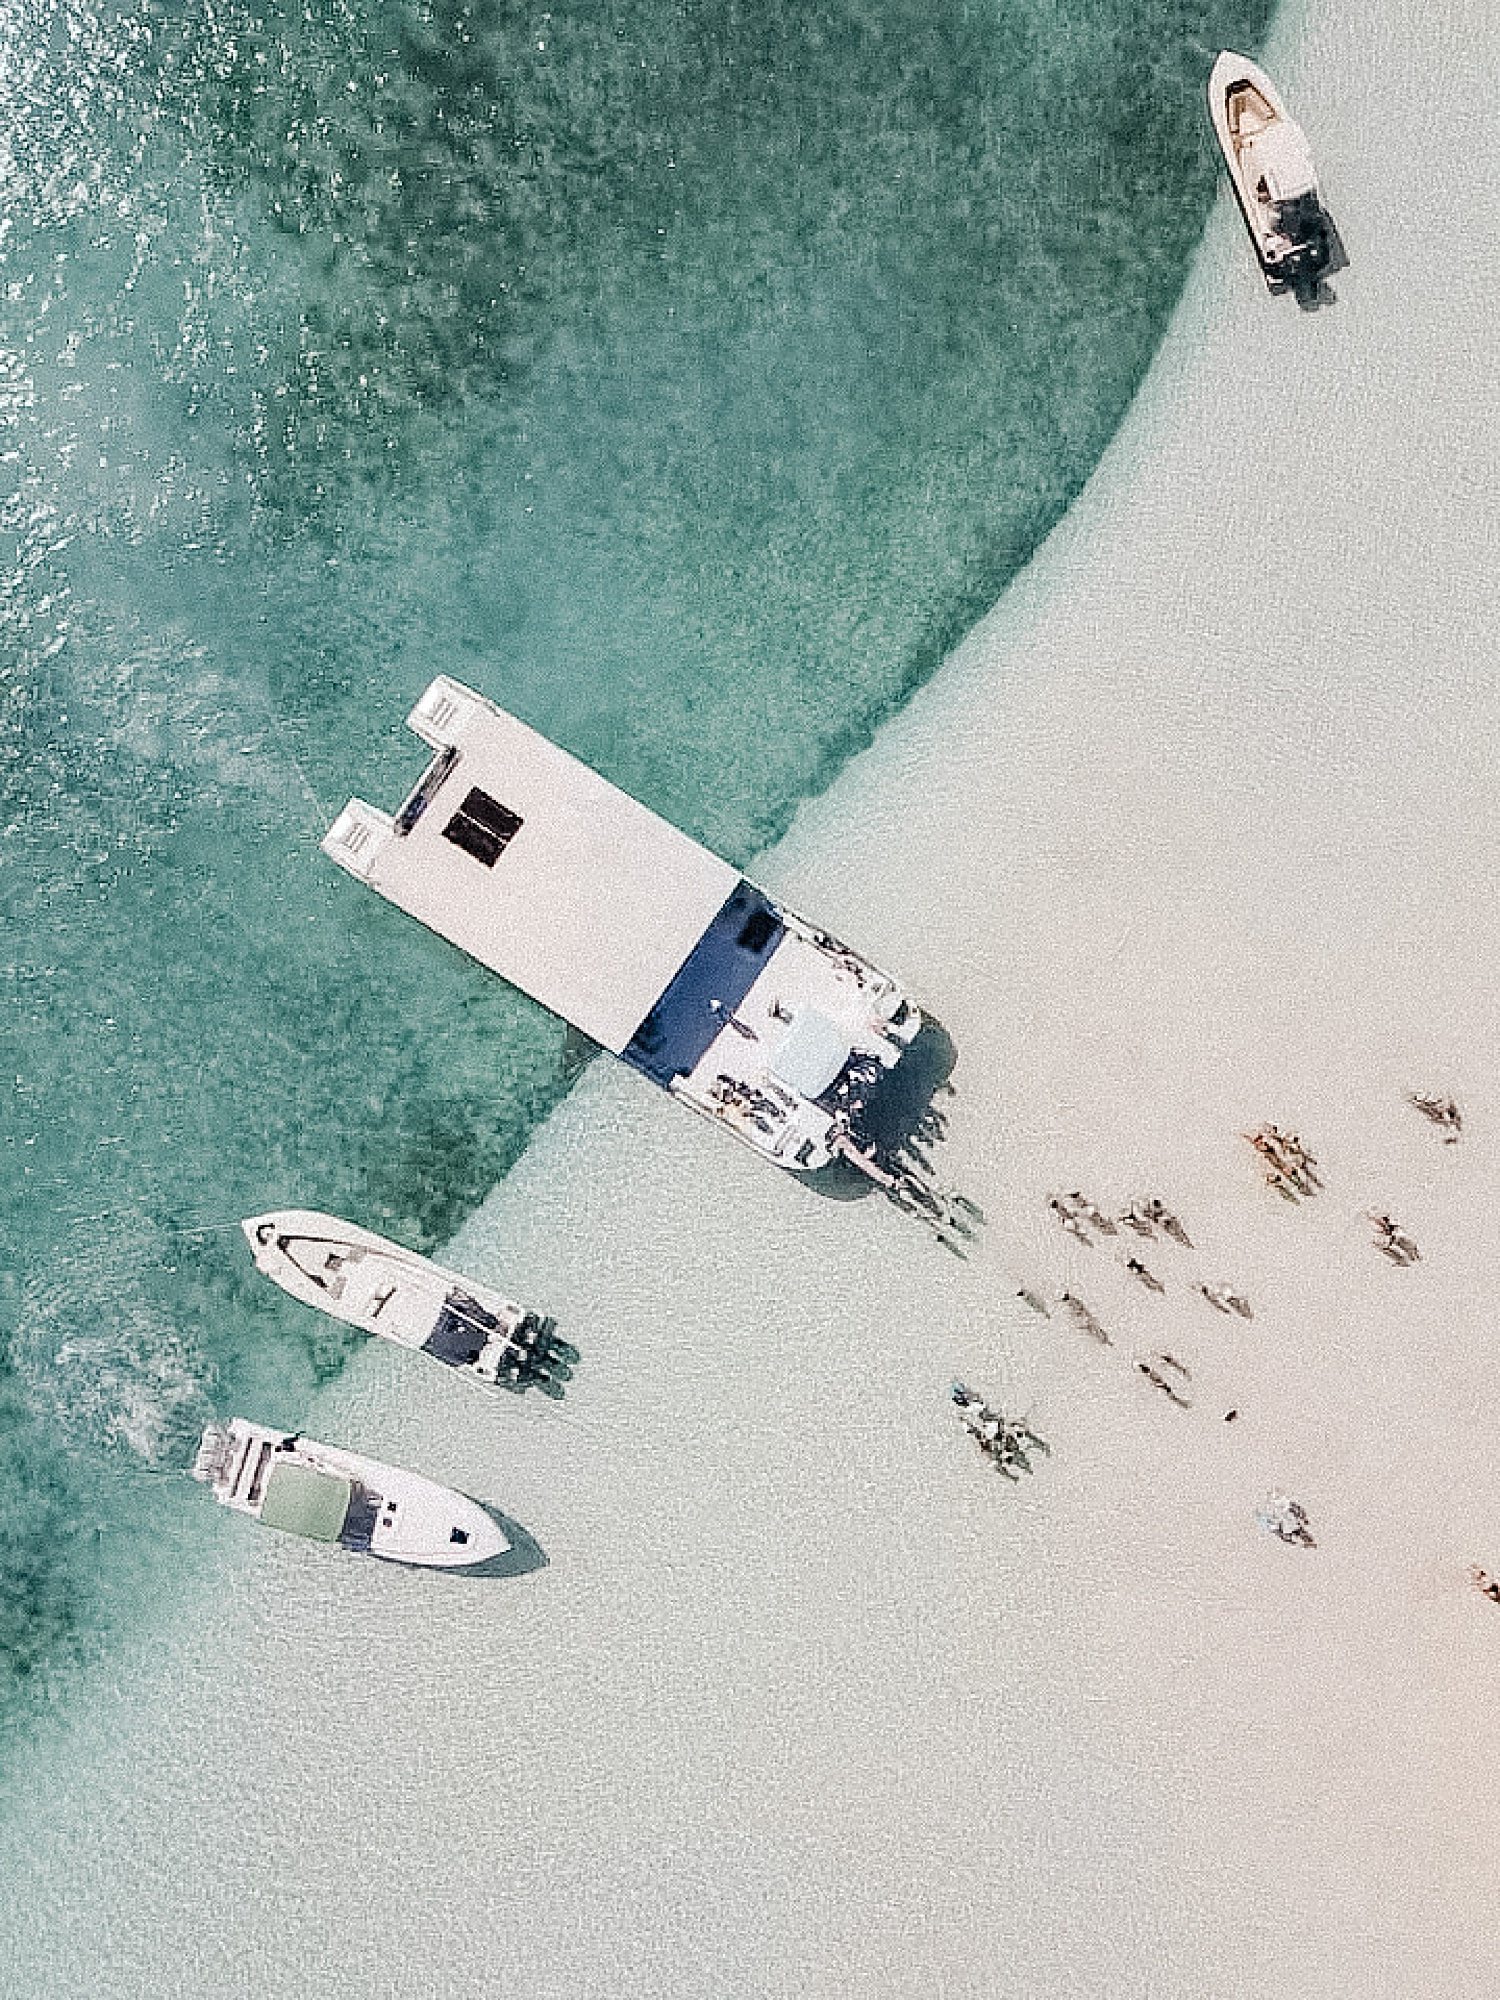 Boats on beach in the Bahamas from above